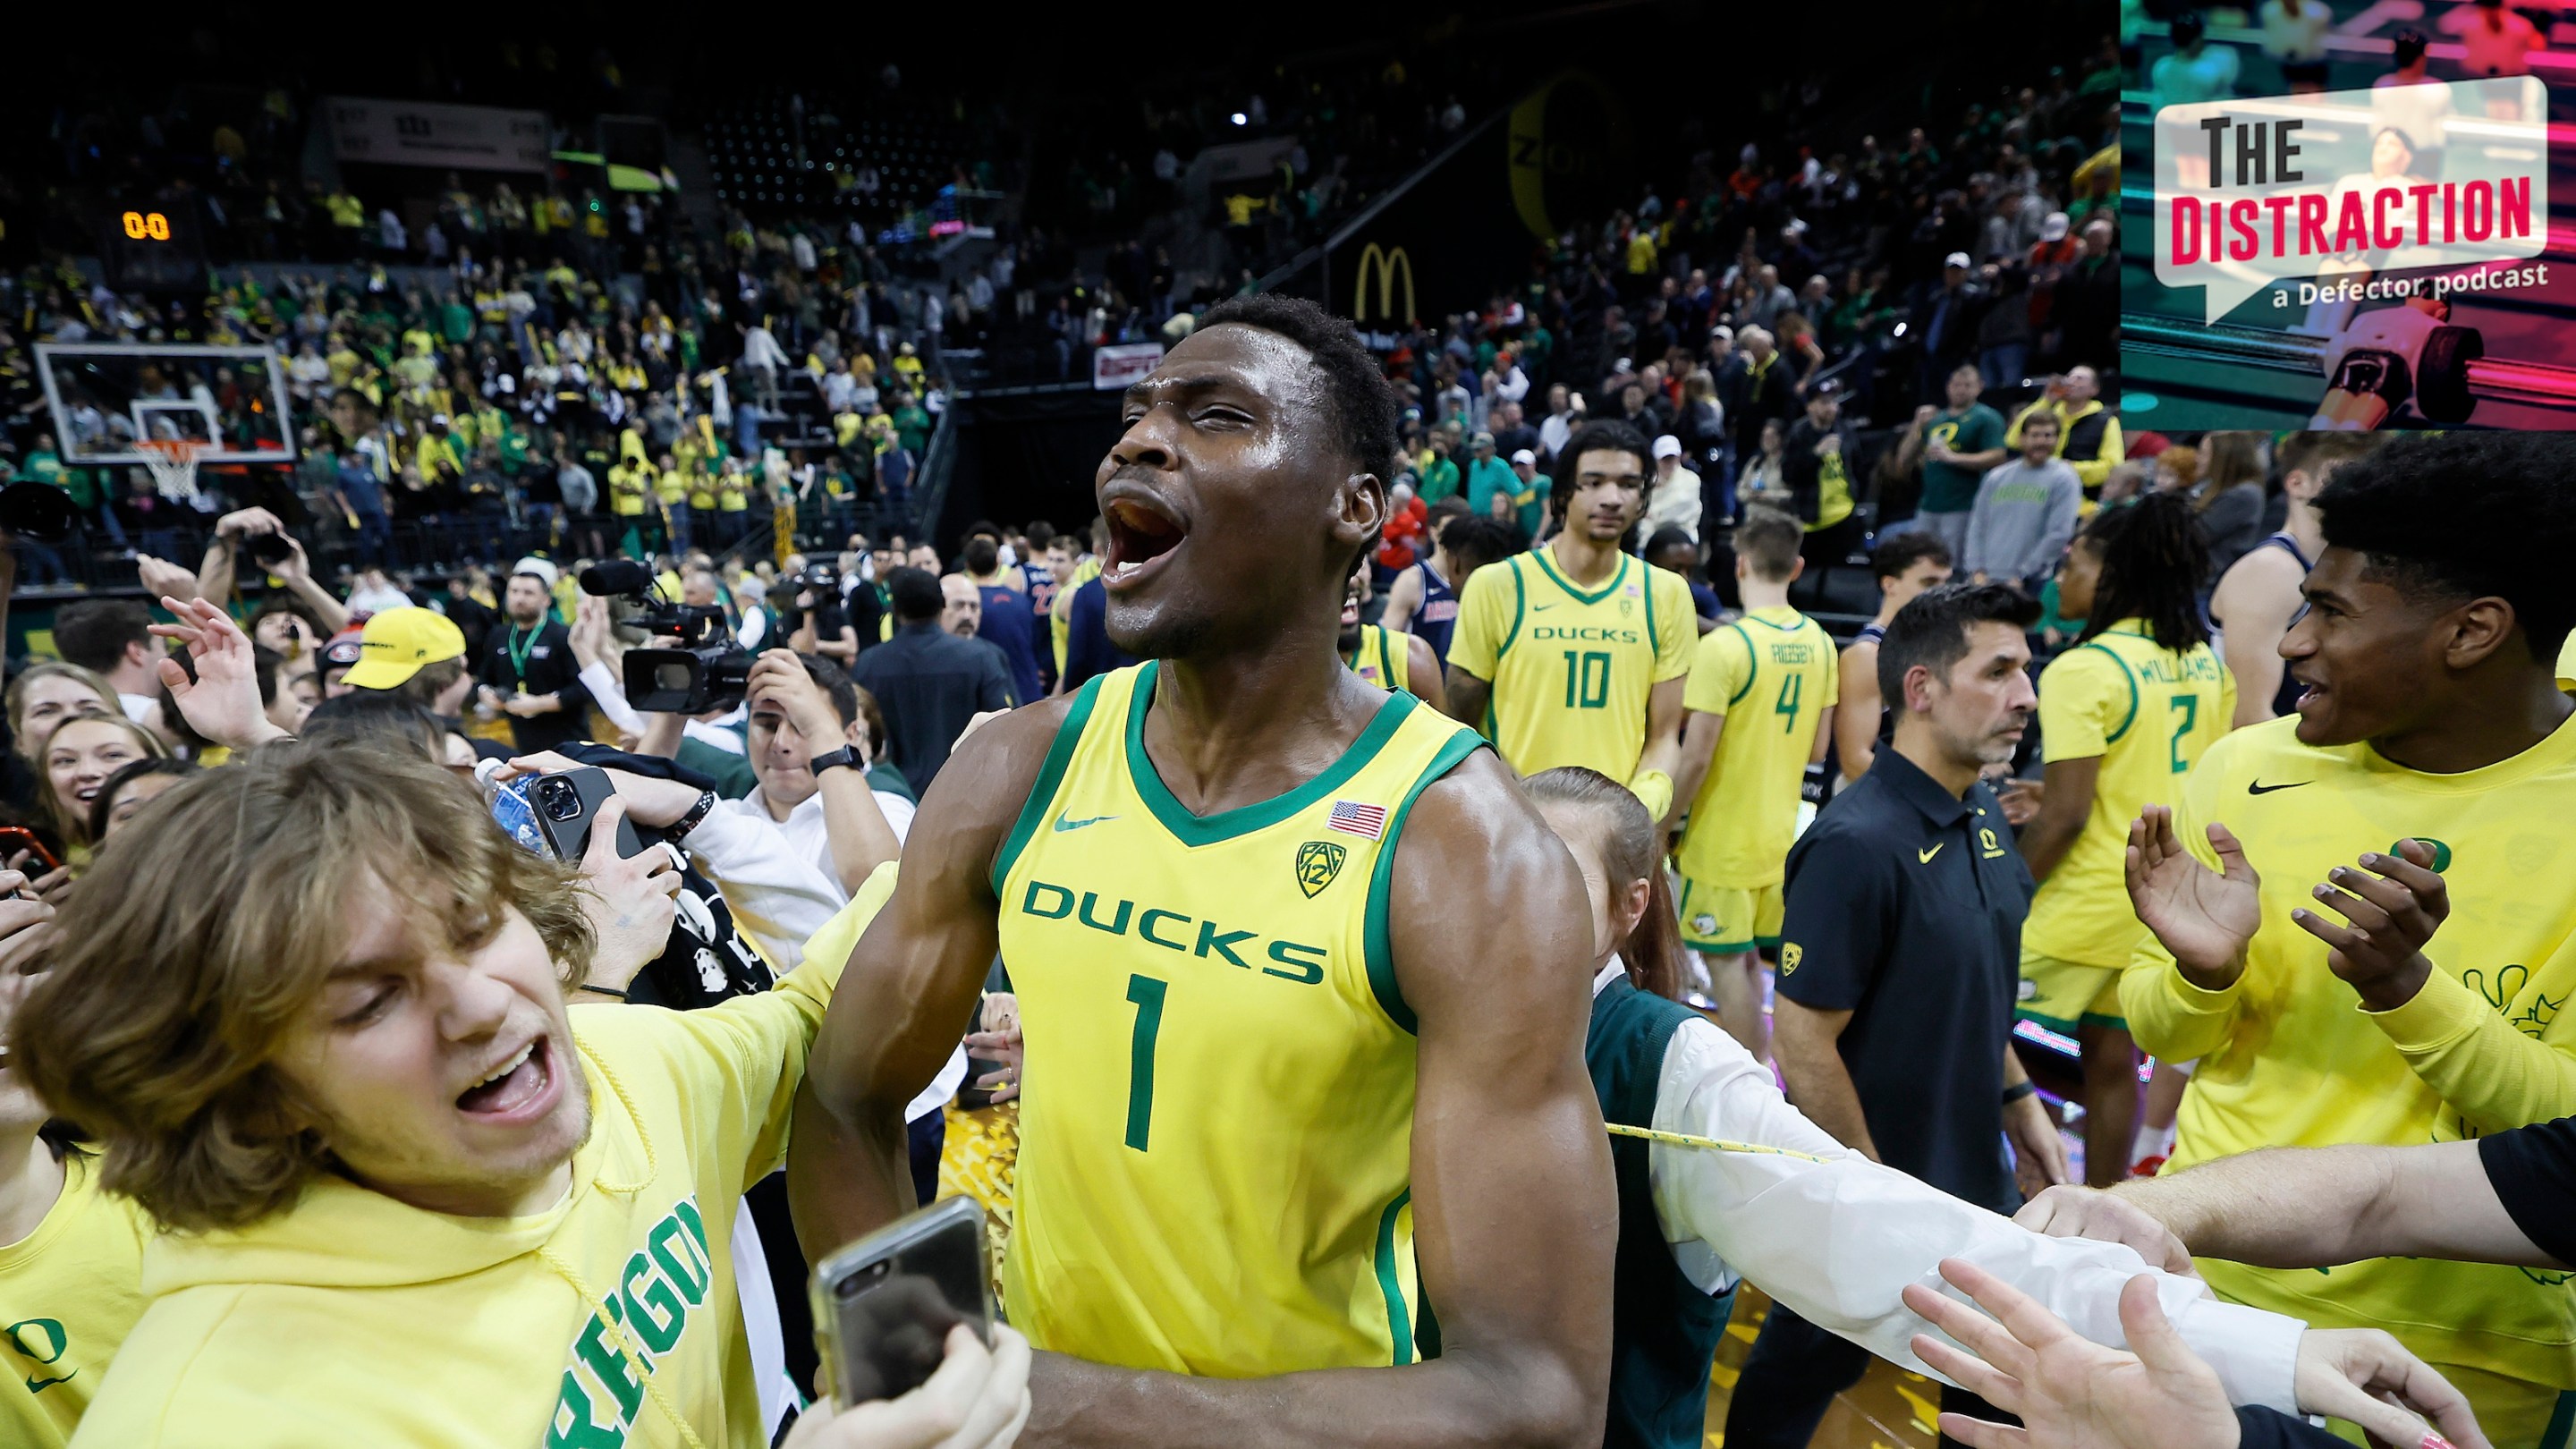 N'Faly Dante of the Oregon Ducks celebrates with fans after defeating the Arizona Wildcats at Matthew Knight Arena on January 14, 2023 in Eugene, Oregon.